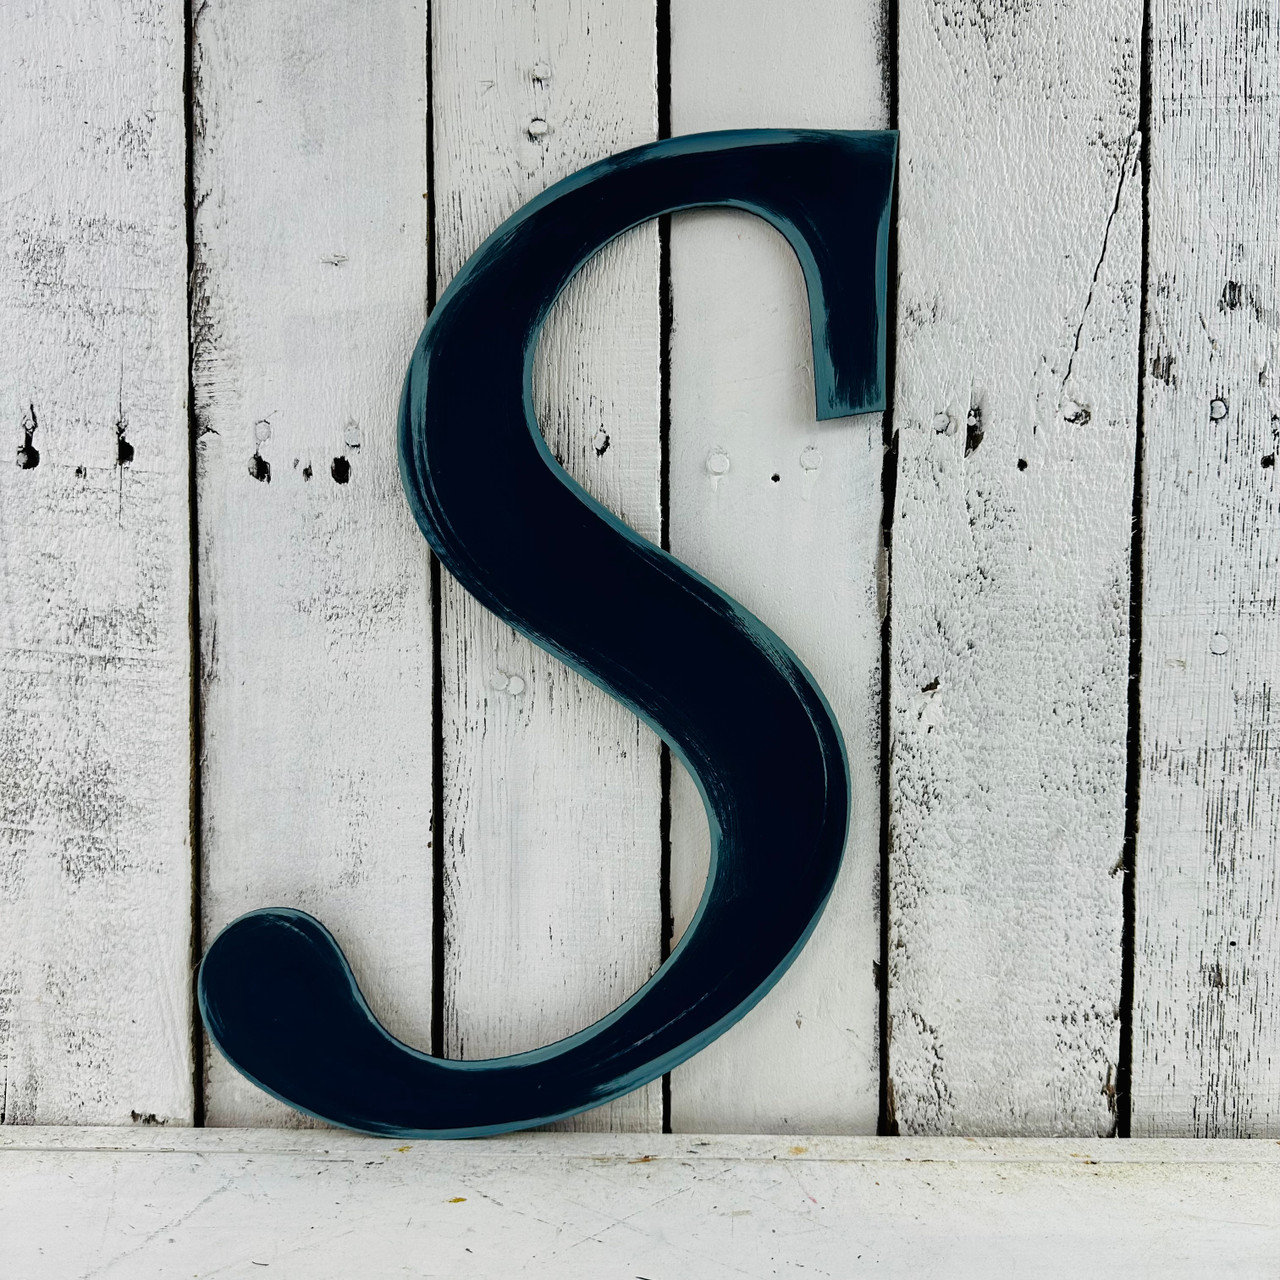 Cursive Wooden Letters C for Wall Decor 14 inch Large Wooden Letters Unfinished Monogram Wood Letter Crafts Alphabet Sign Cutouts for DIY Painting